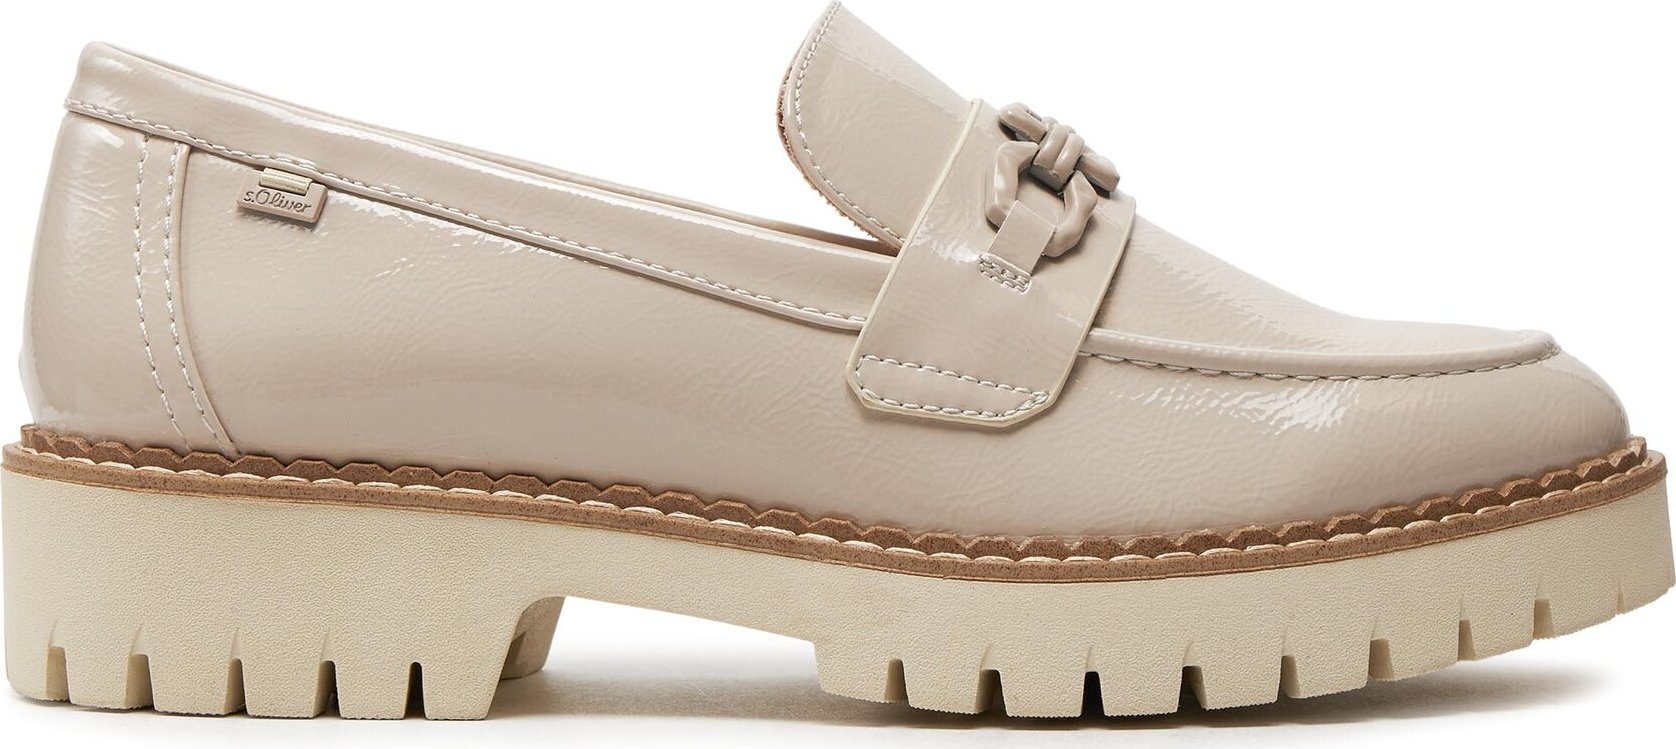 Loafersy s.Oliver 5-24702-42 Beige Patent 407